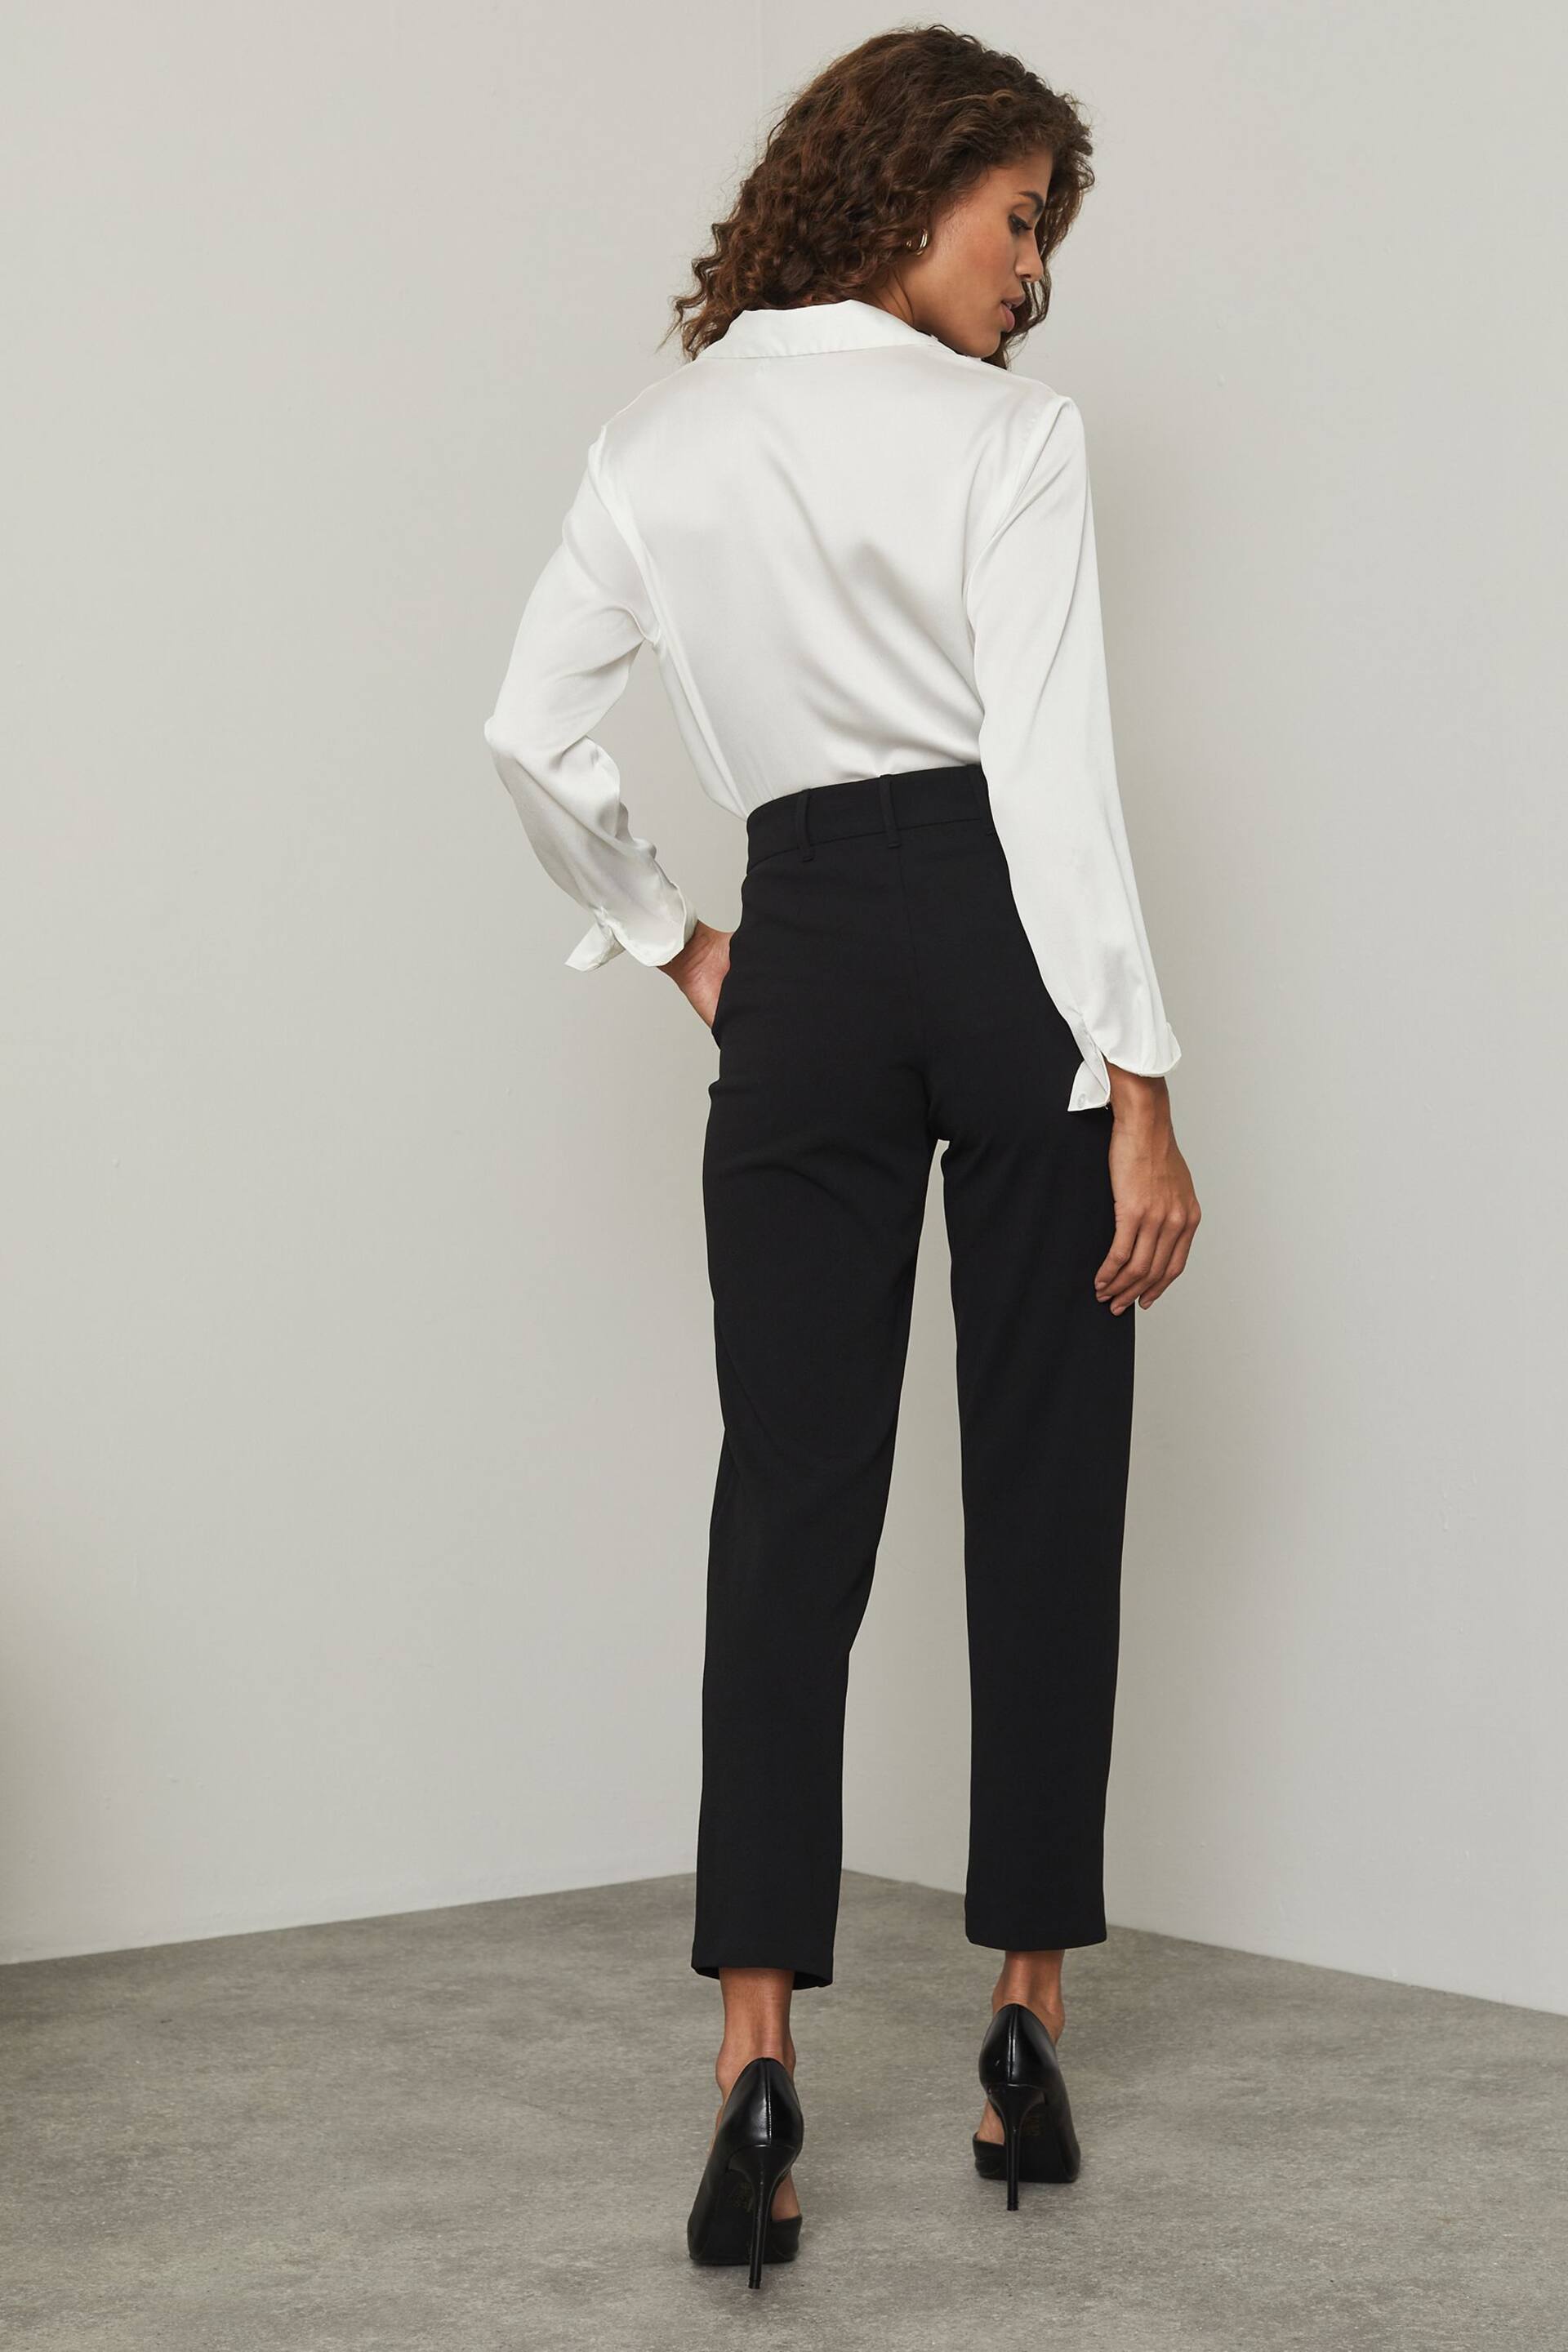 Lipsy Black Tailored Tapered Smart Trousers - Image 2 of 4